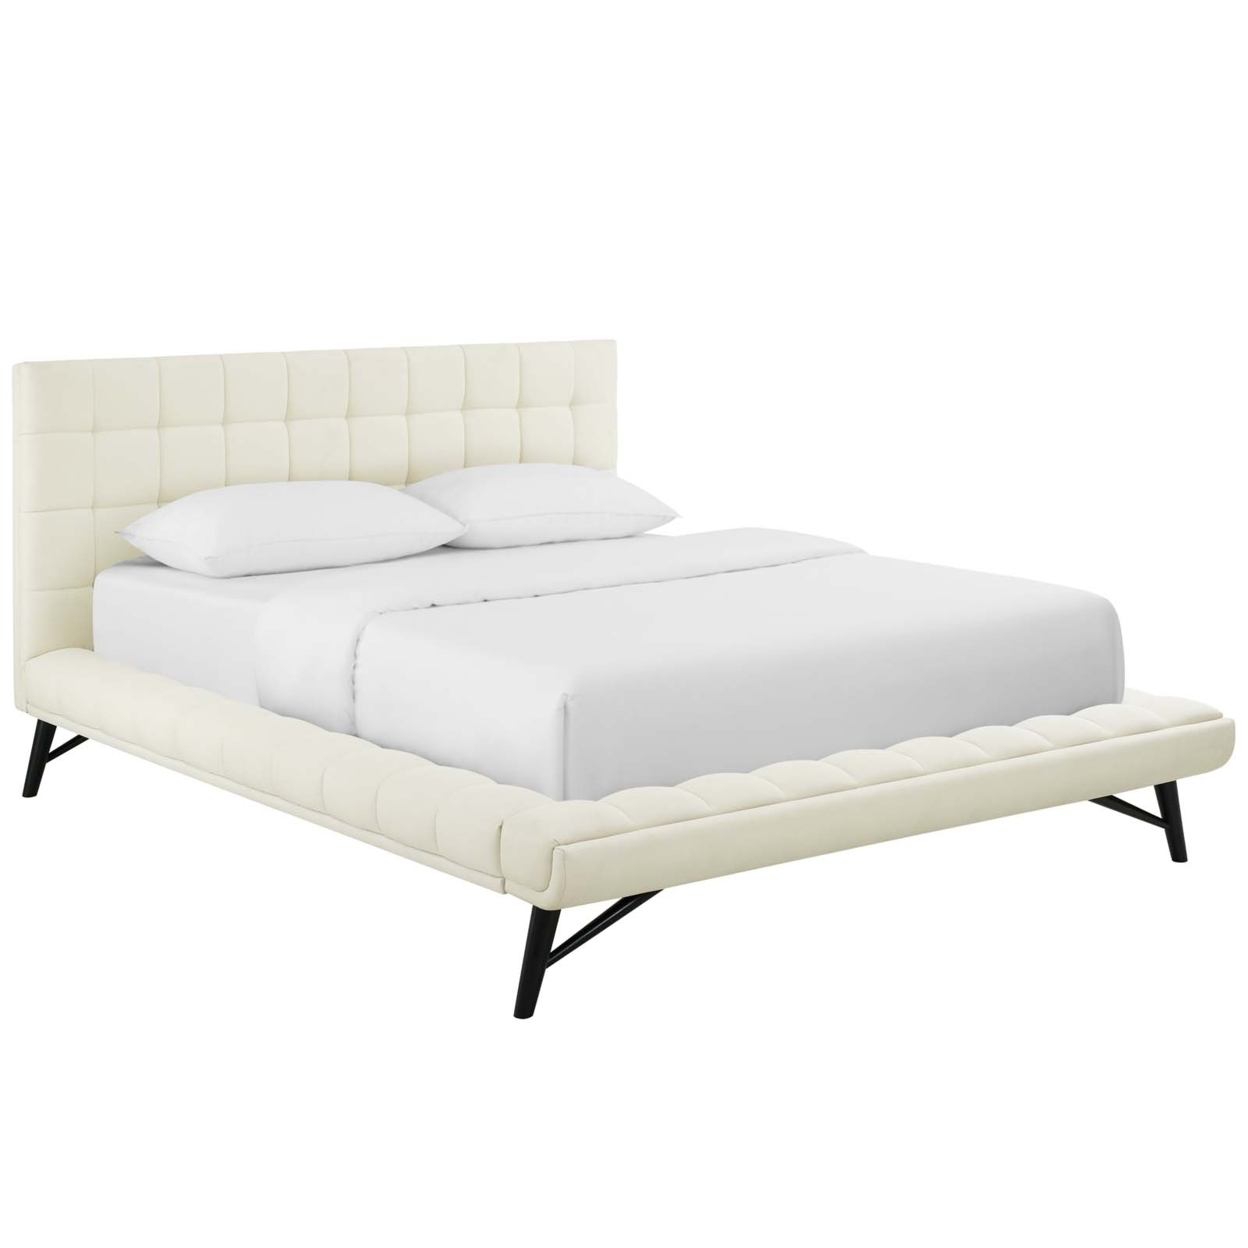 Julia Queen Biscuit Tufted Upholstered Fabric Platform Bed, Ivory